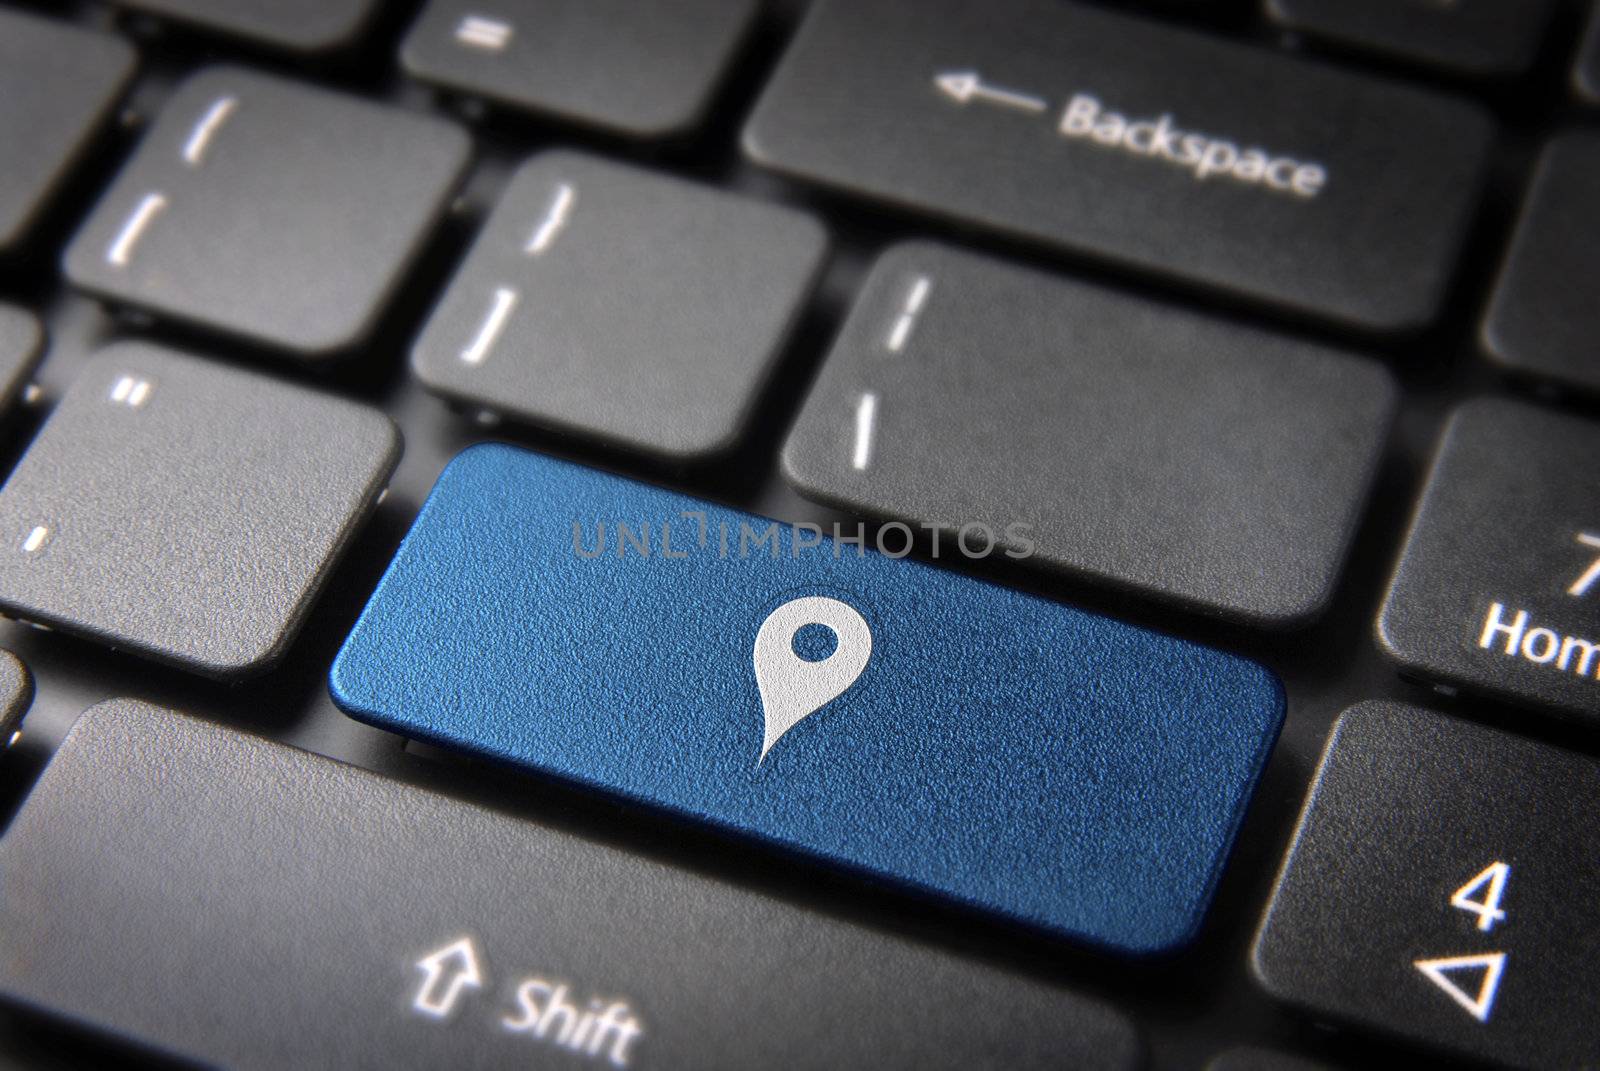 Blue key with geo location icon on laptop keyboard. Included clipping path, so you can easily edit it.